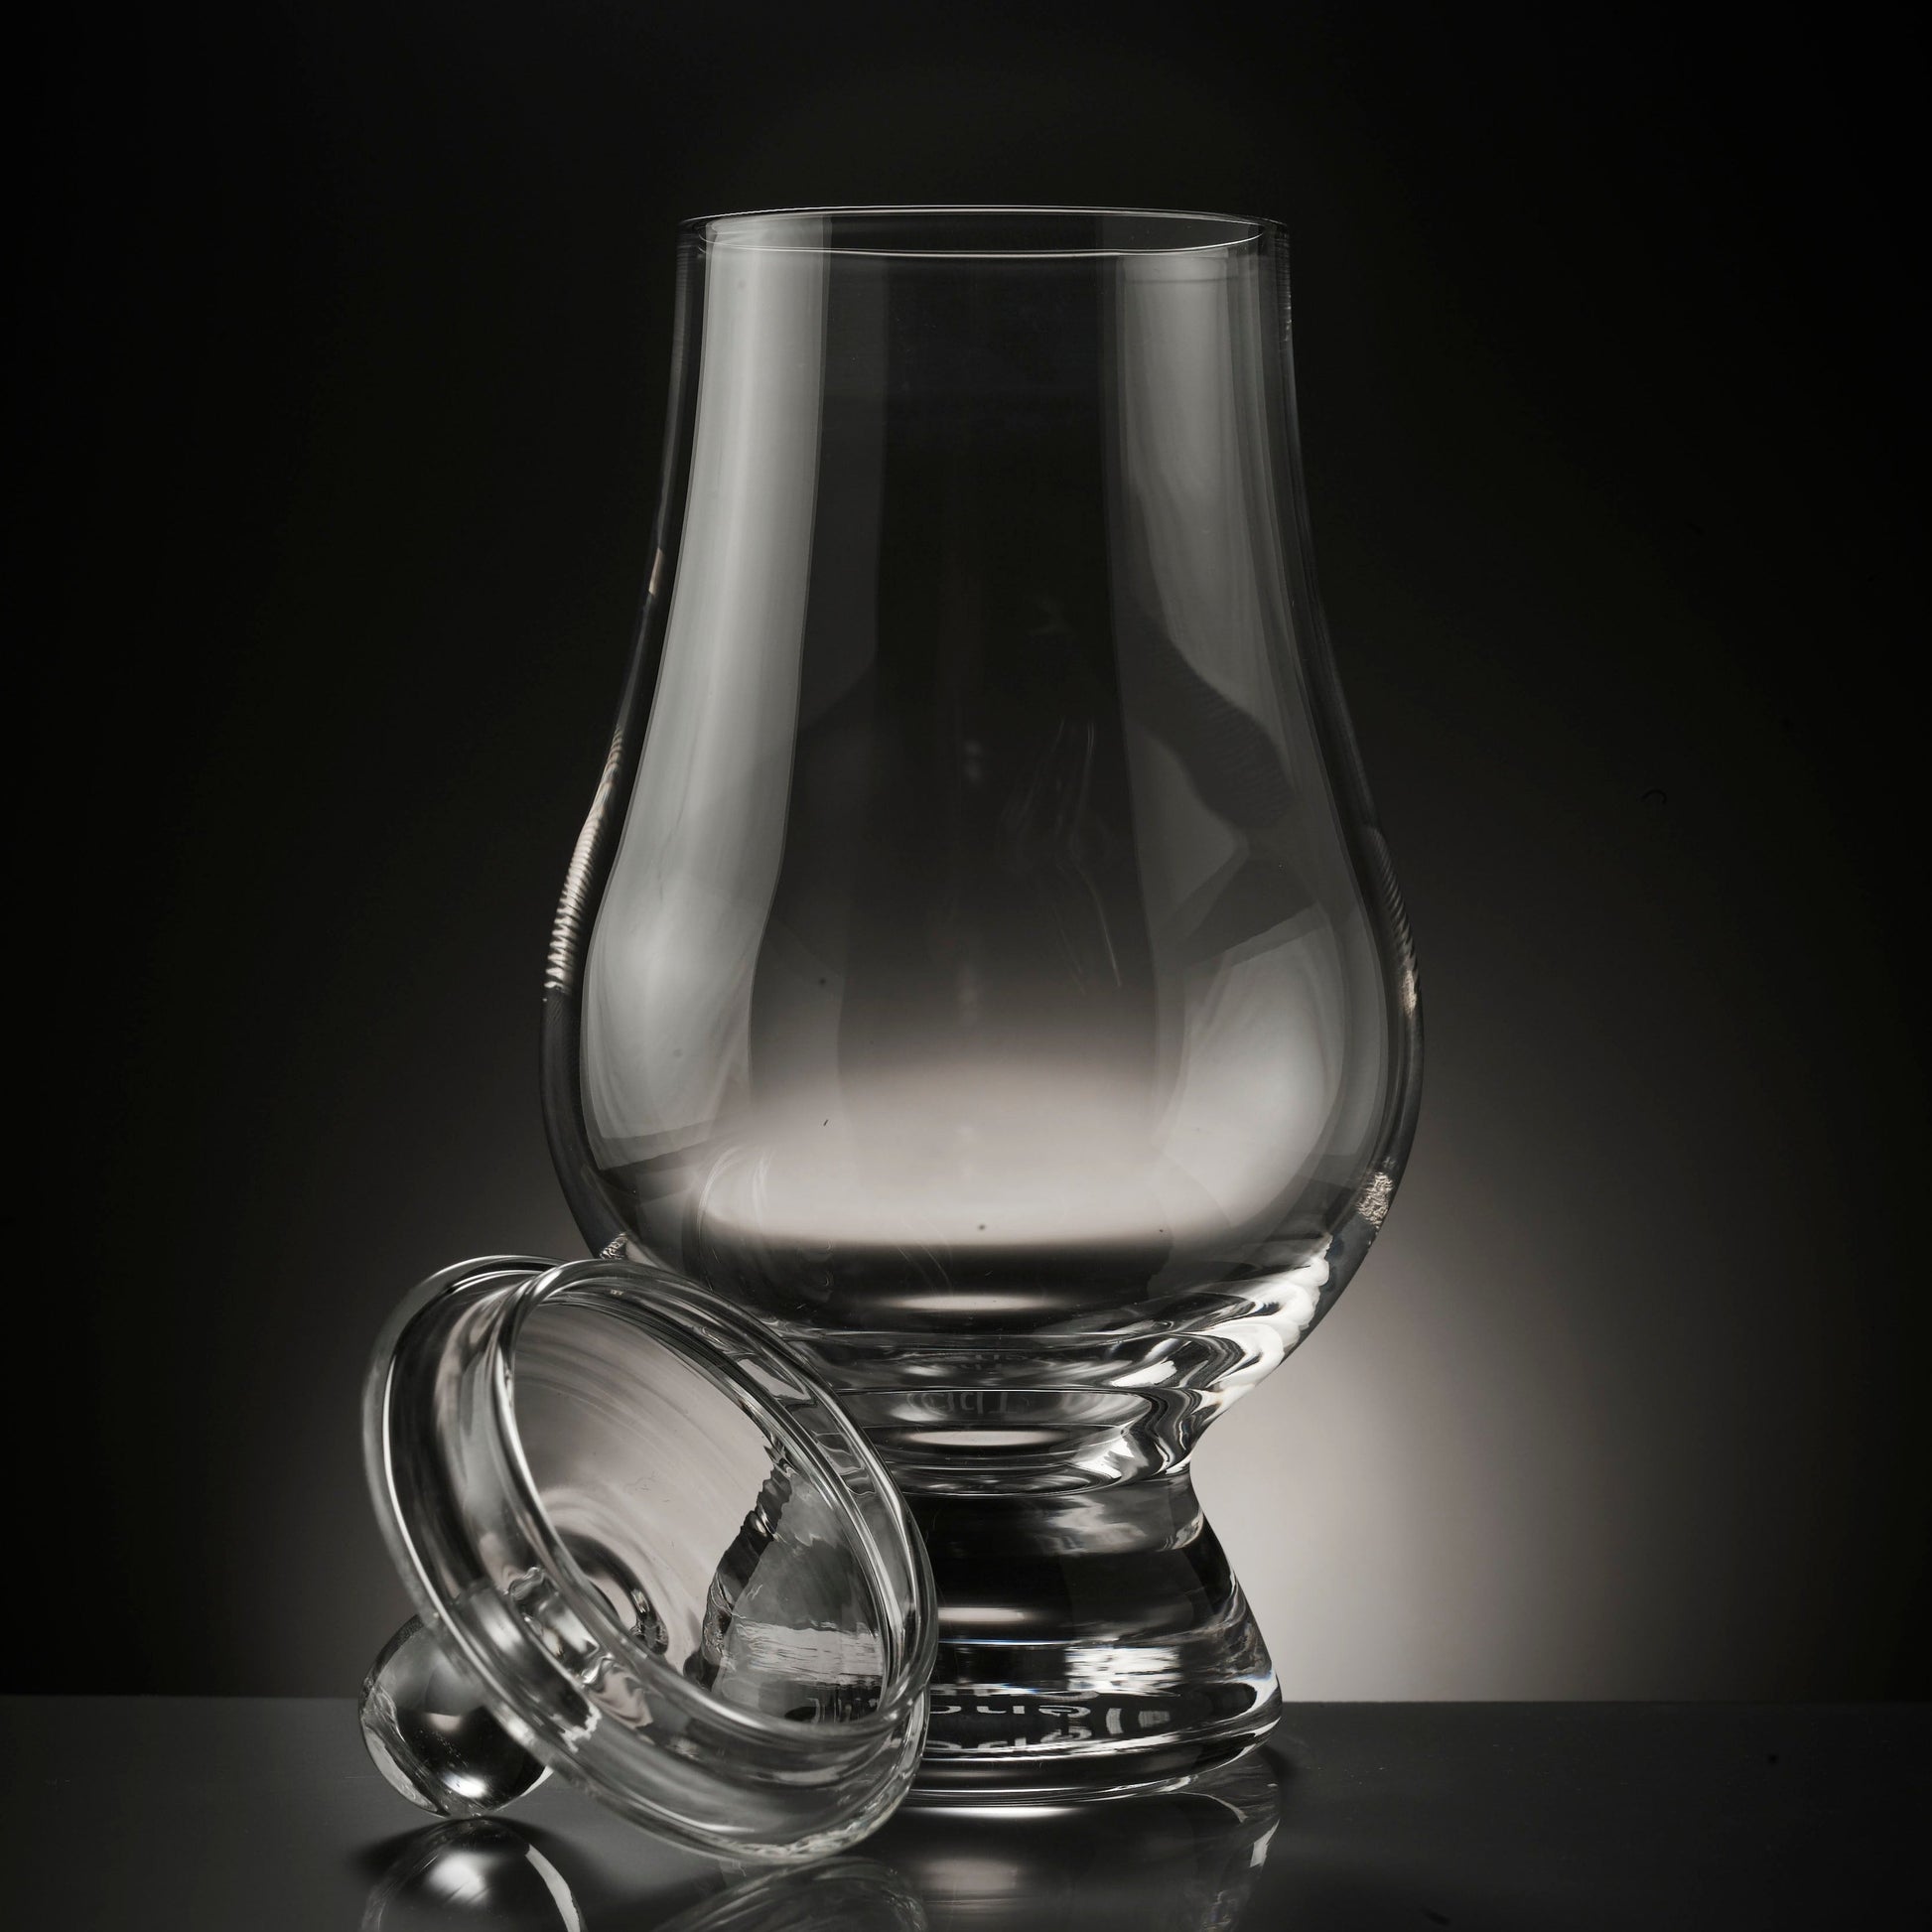 This tasting cap is designed specifically for the Glencairn Whisk glass.